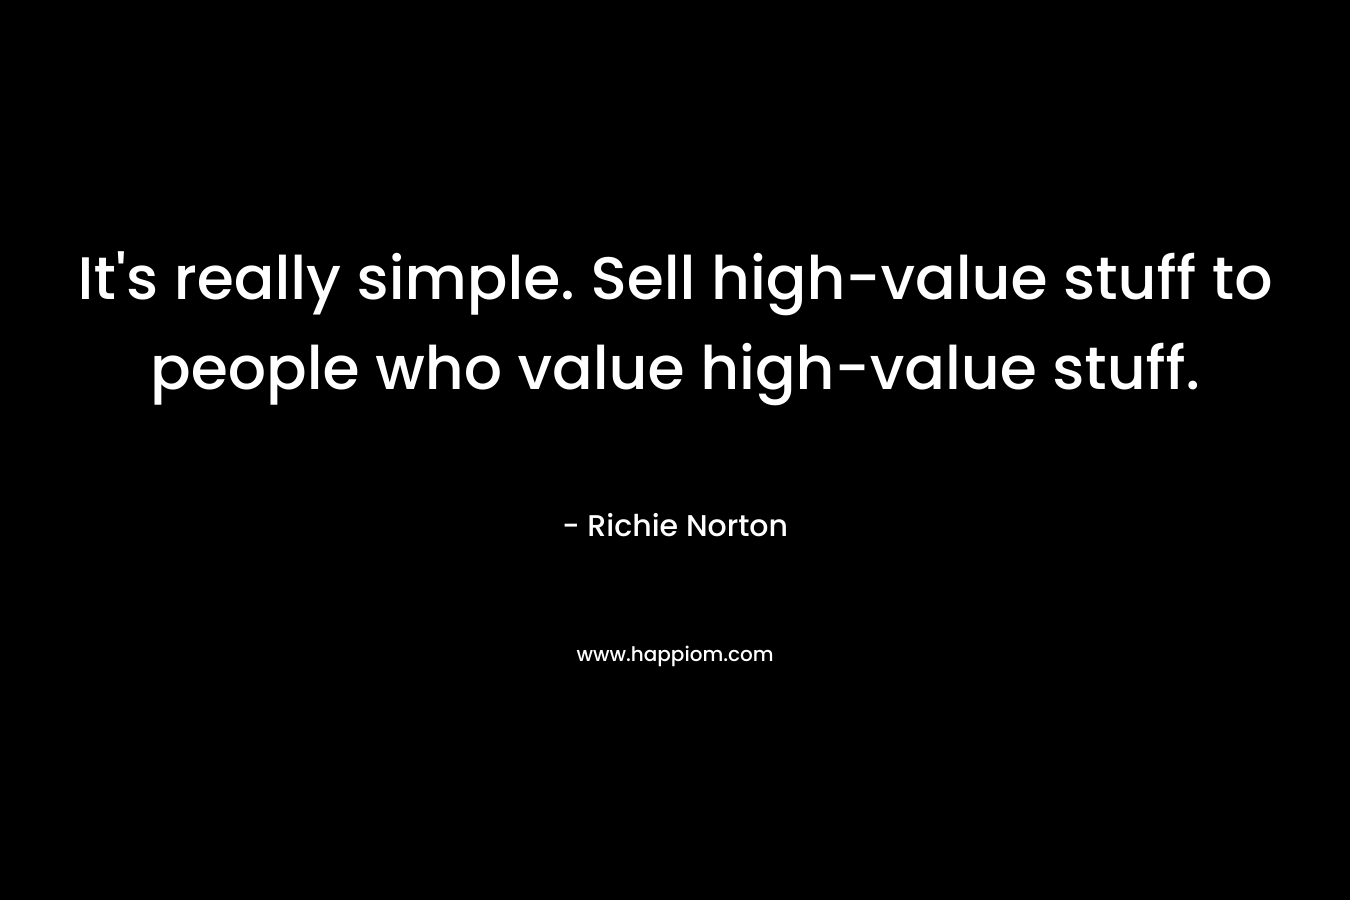 It's really simple. Sell high-value stuff to people who value high-value stuff.